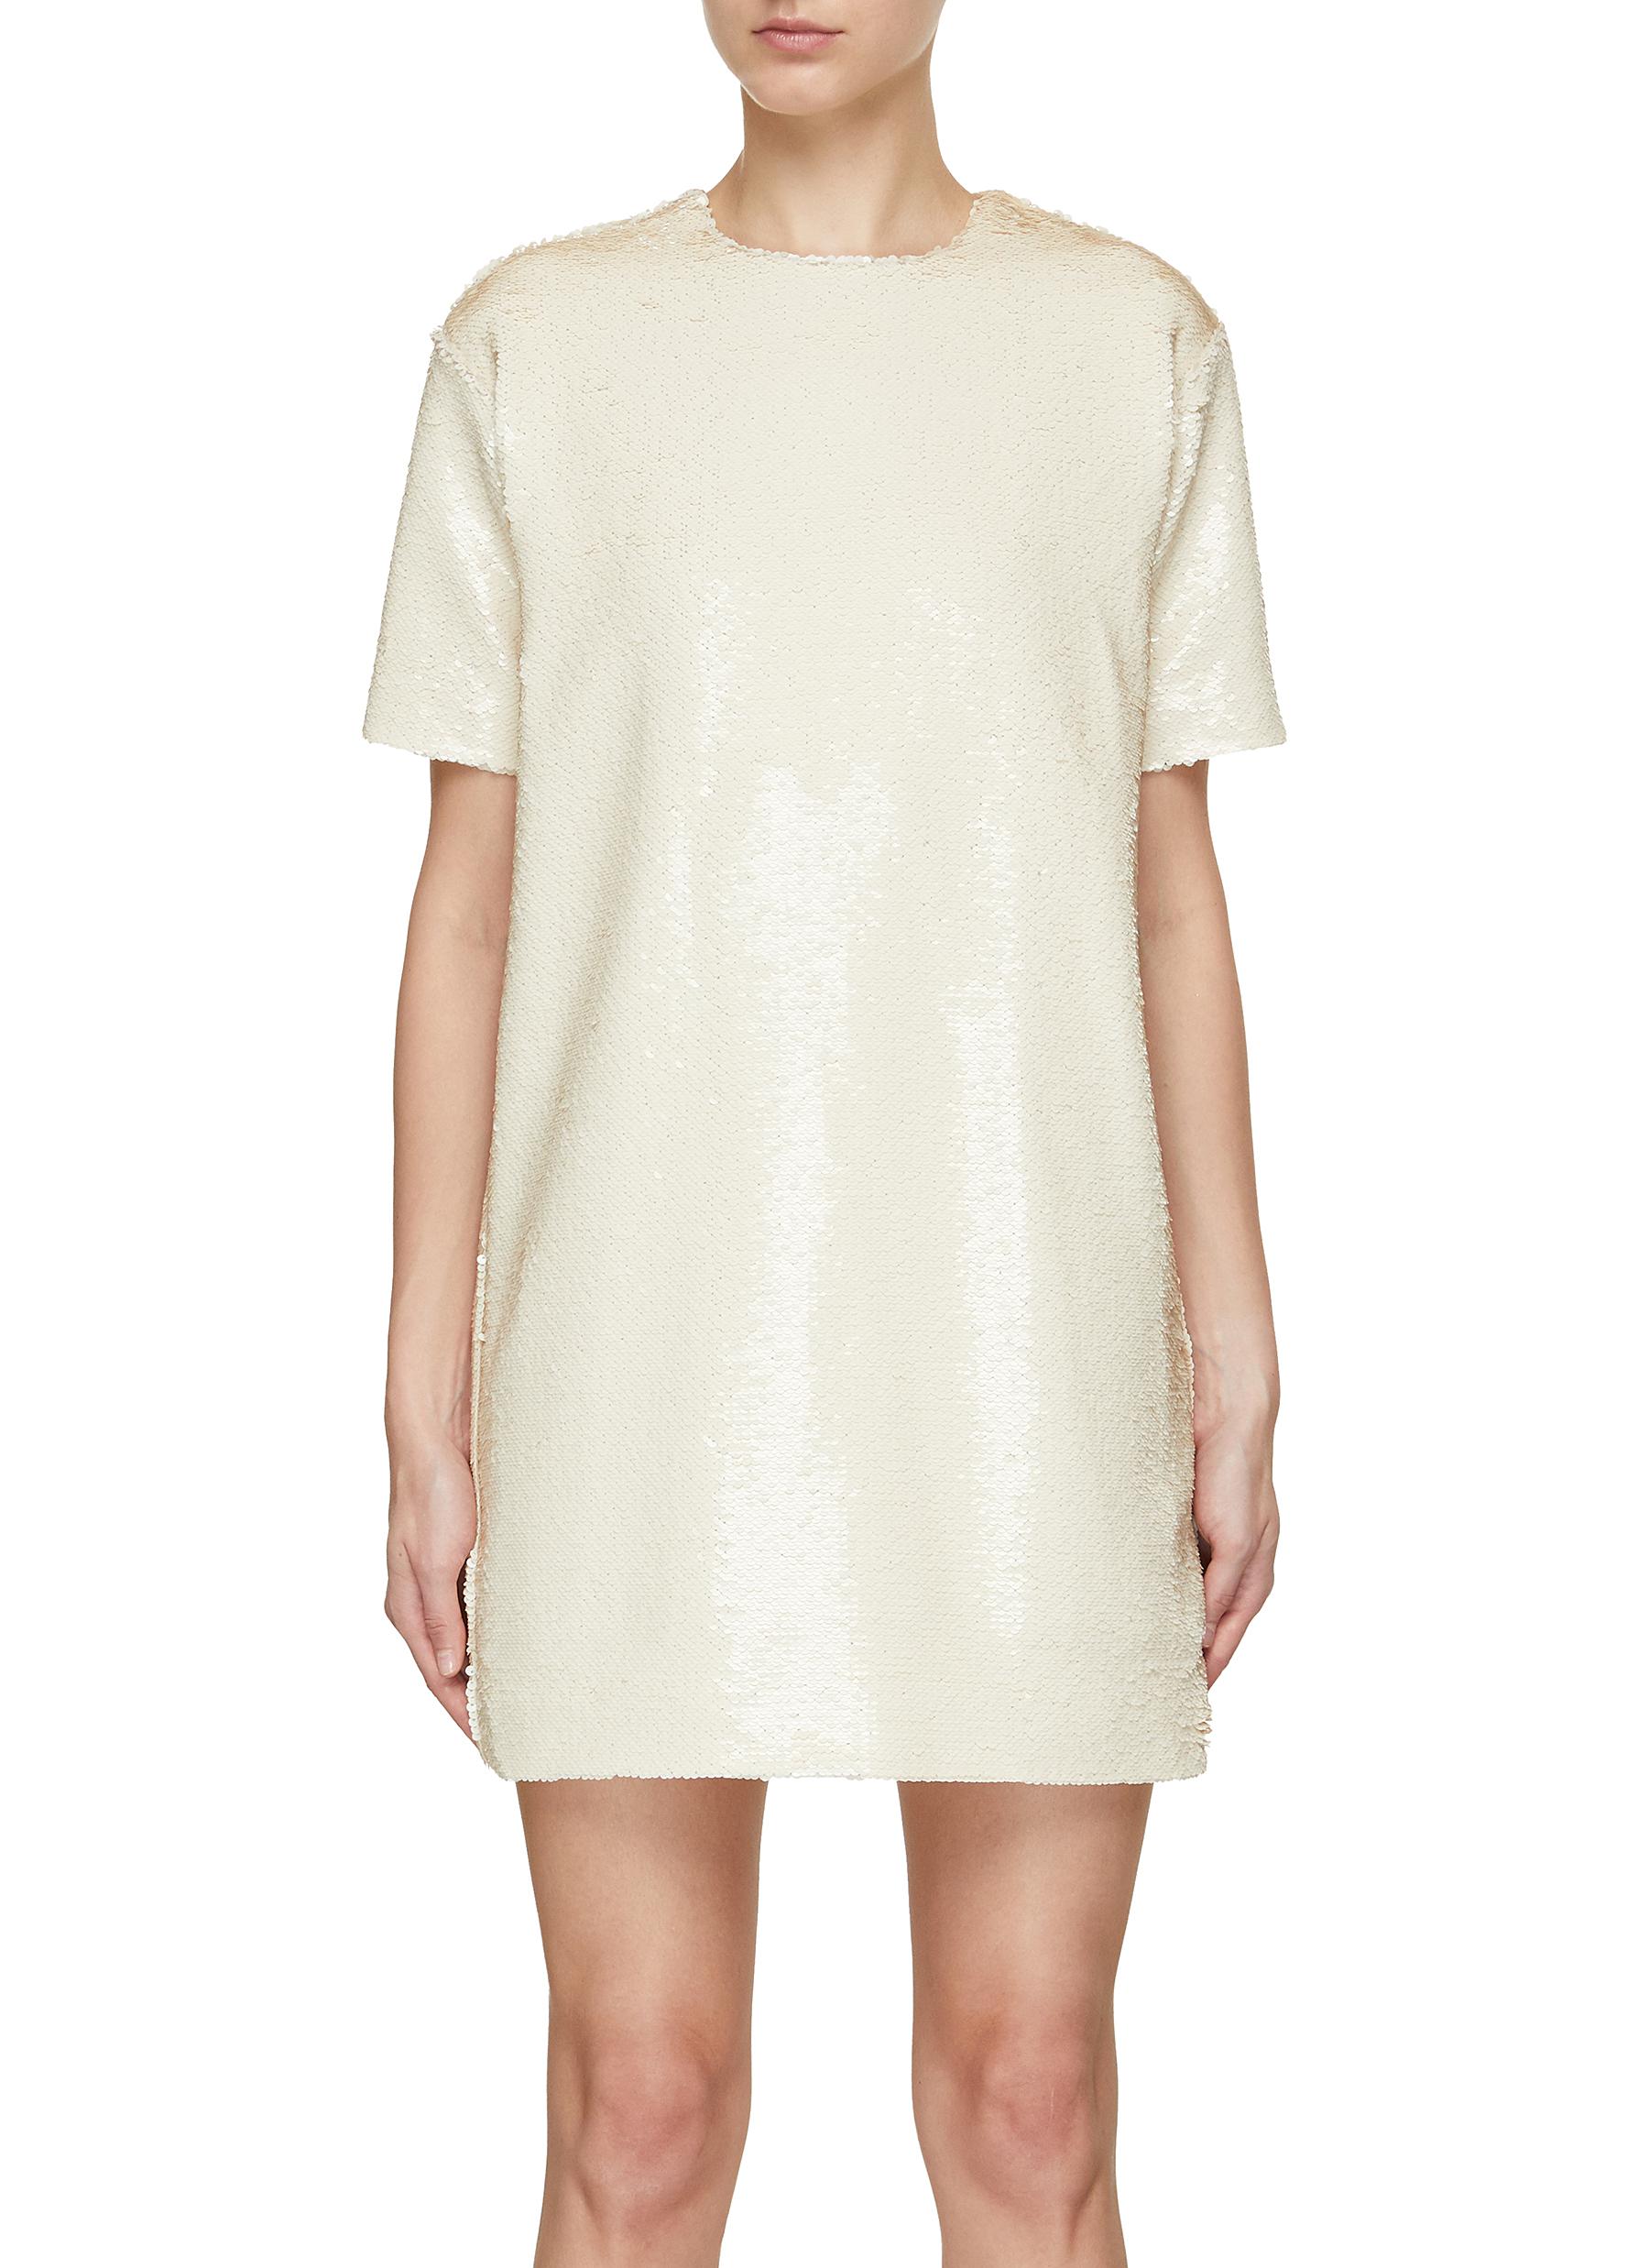 THE FRANKIE SHOP RILEY SEQUINED T-SHIRT MINI DRESS